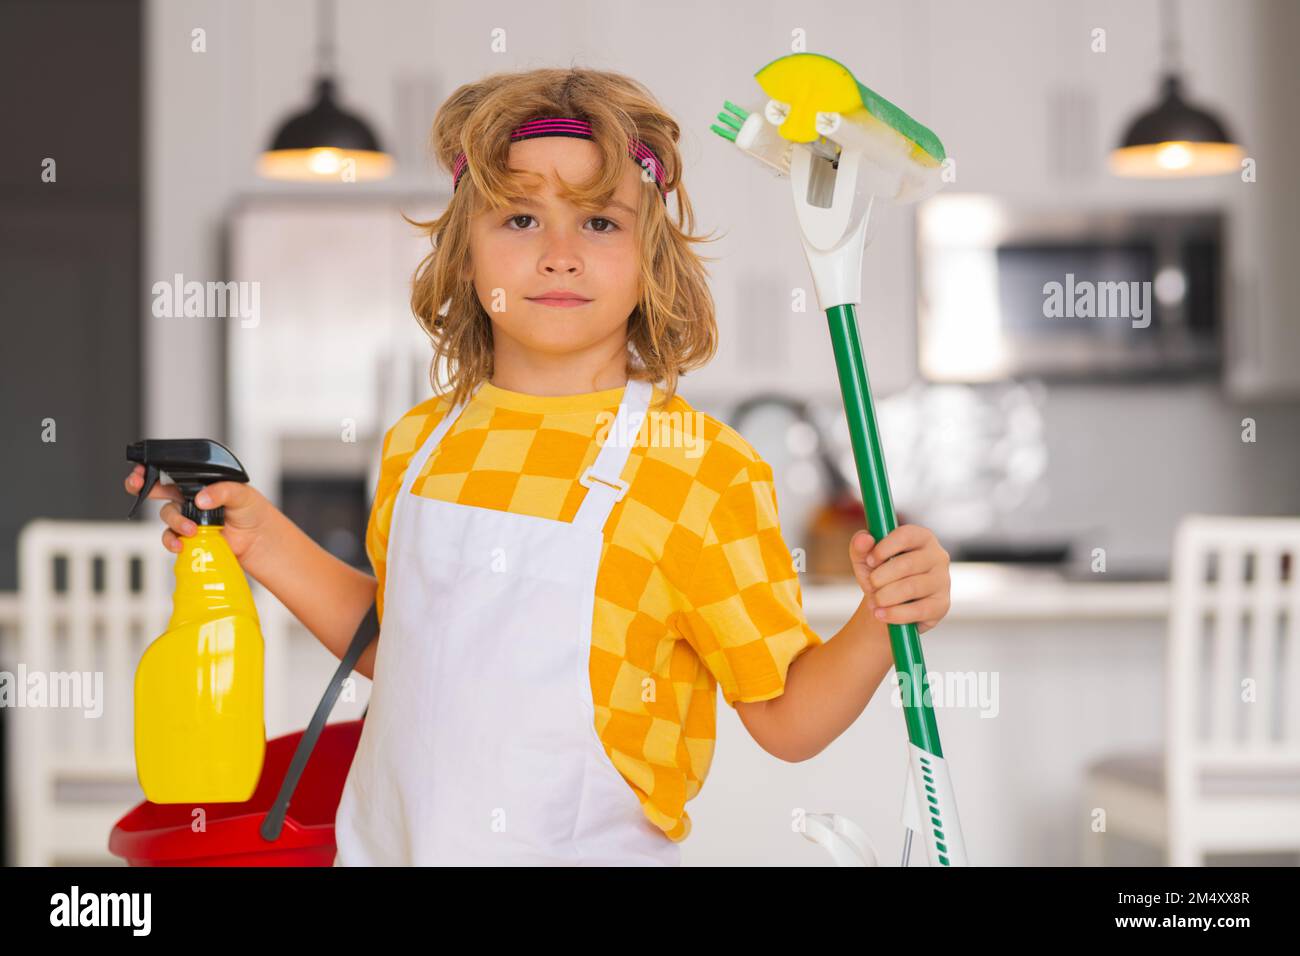 Children helping with housekeeping, cleaning the house. Housekeeping at home. Cute child boy helping with housekeeping on kitchen interior backdround. Stock Photo